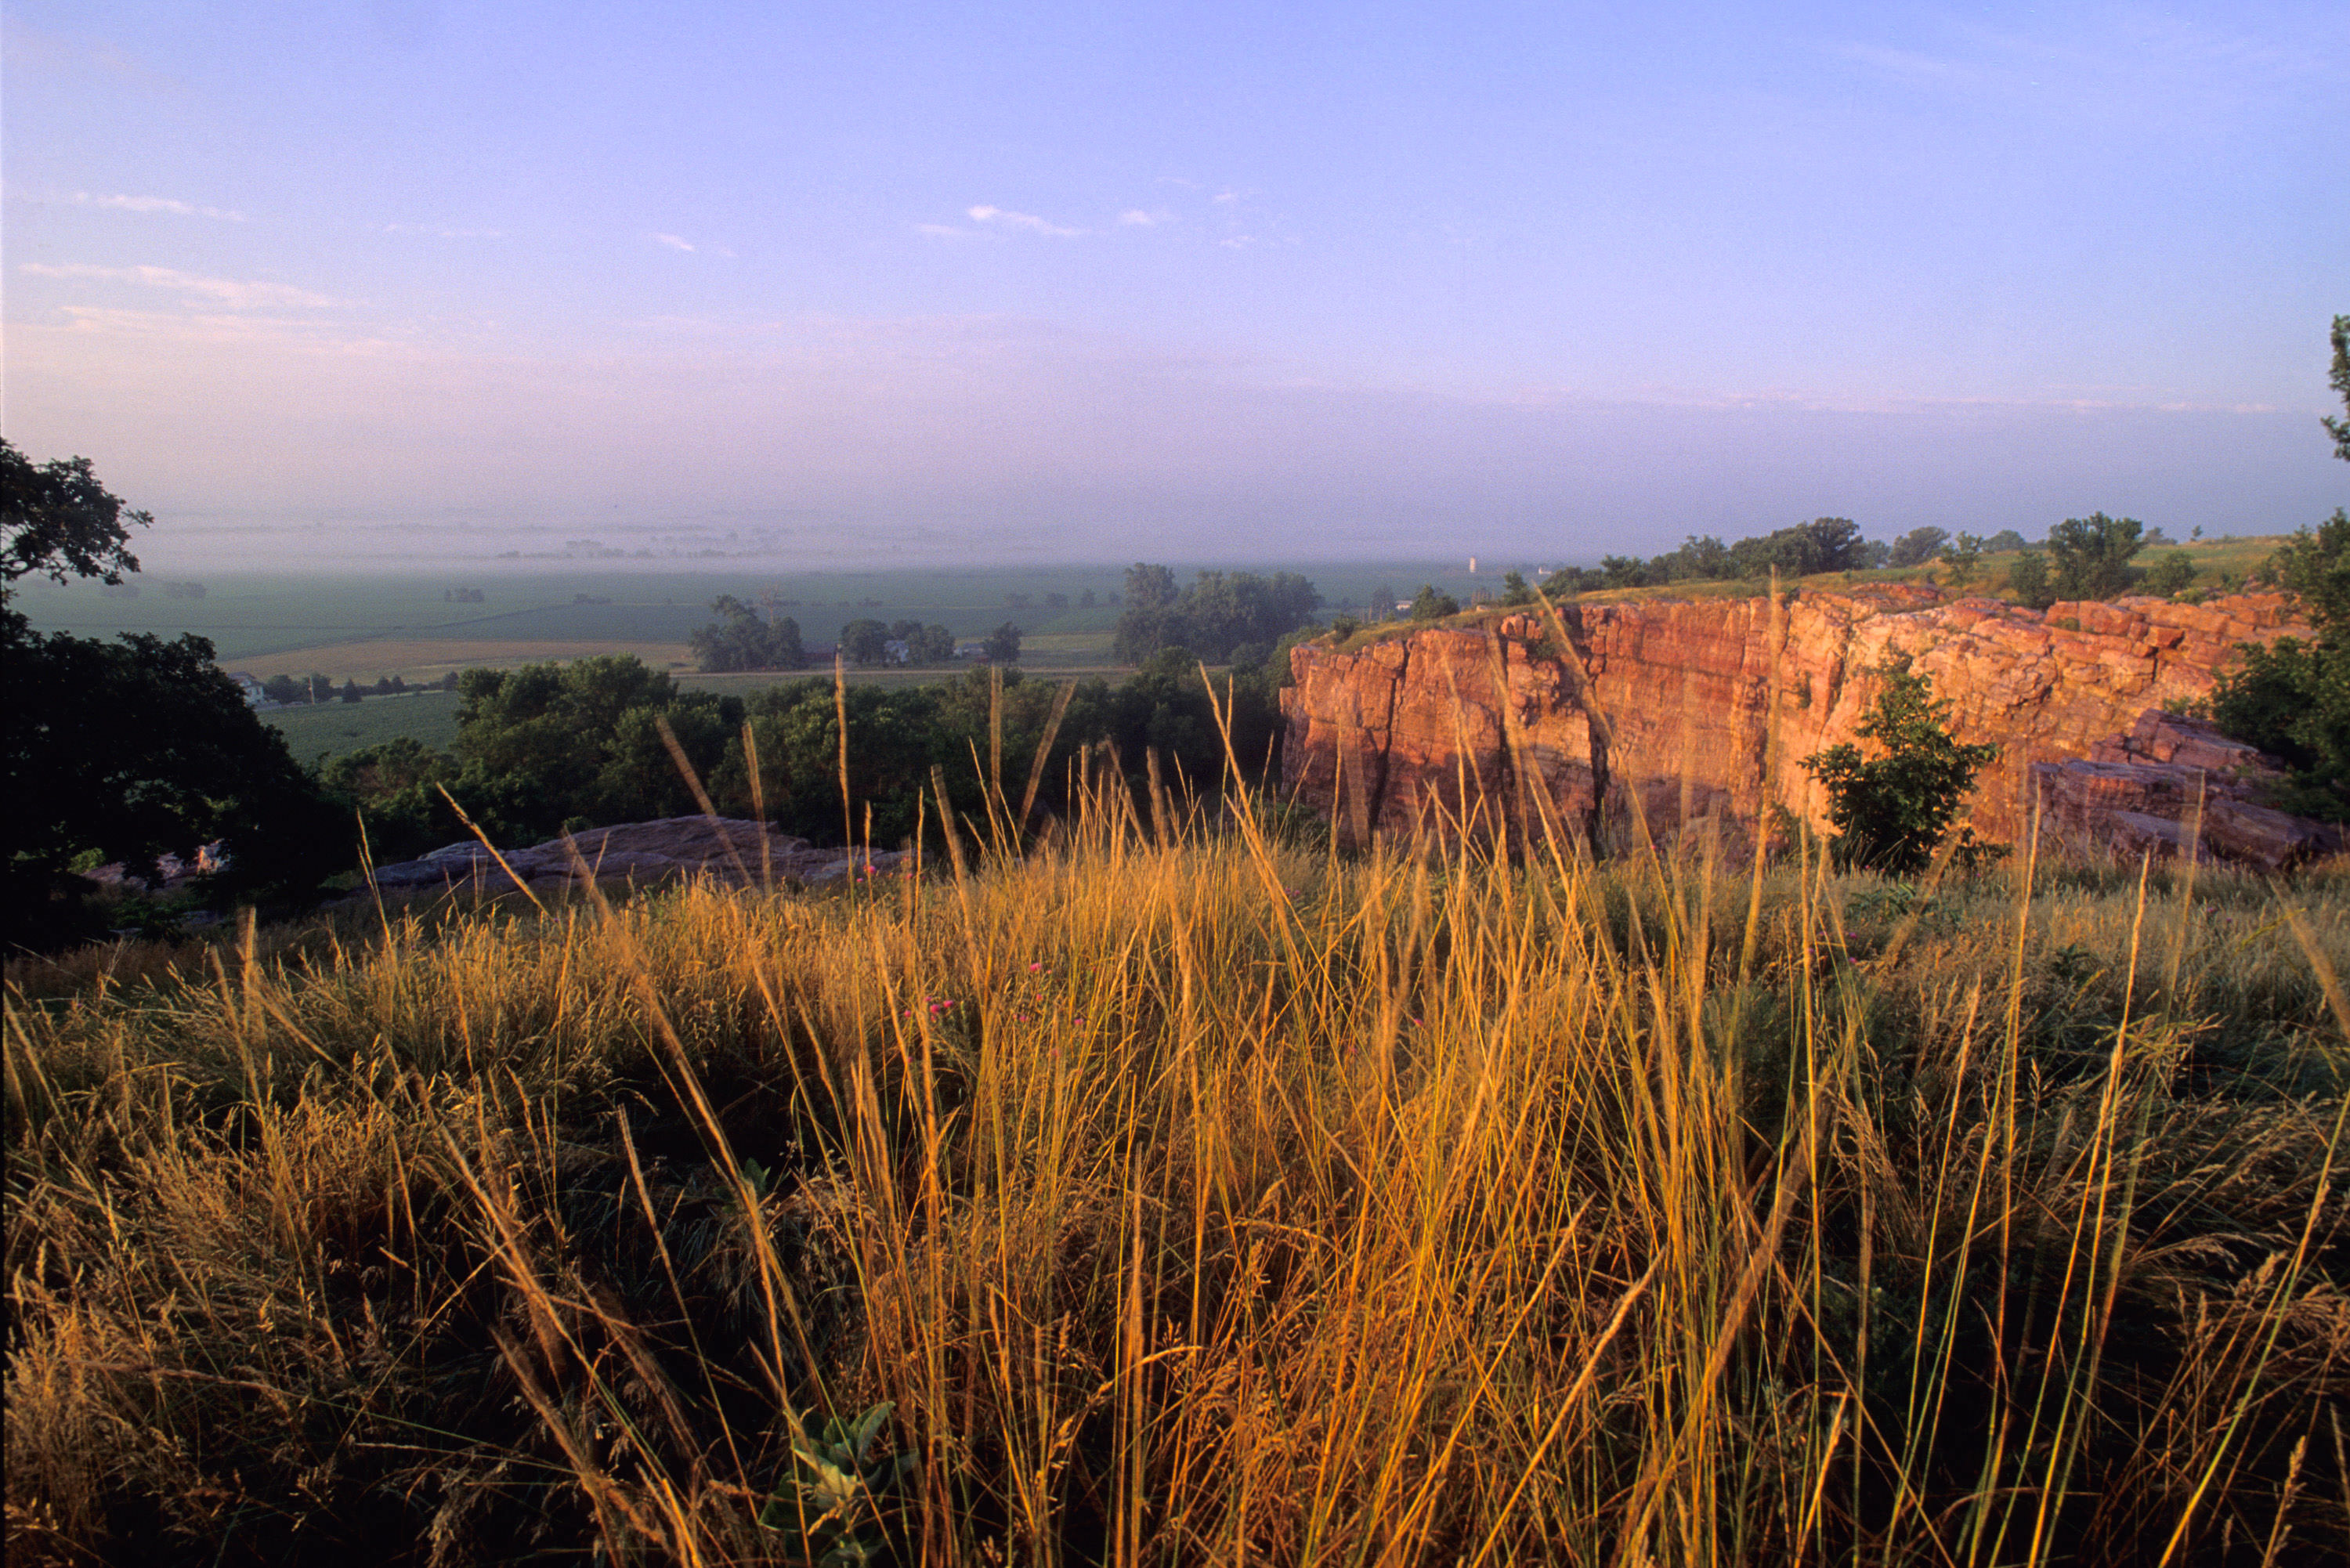 View from a bluff with prairie grasses in the foreground and a sheer cliff and plains in the distance.